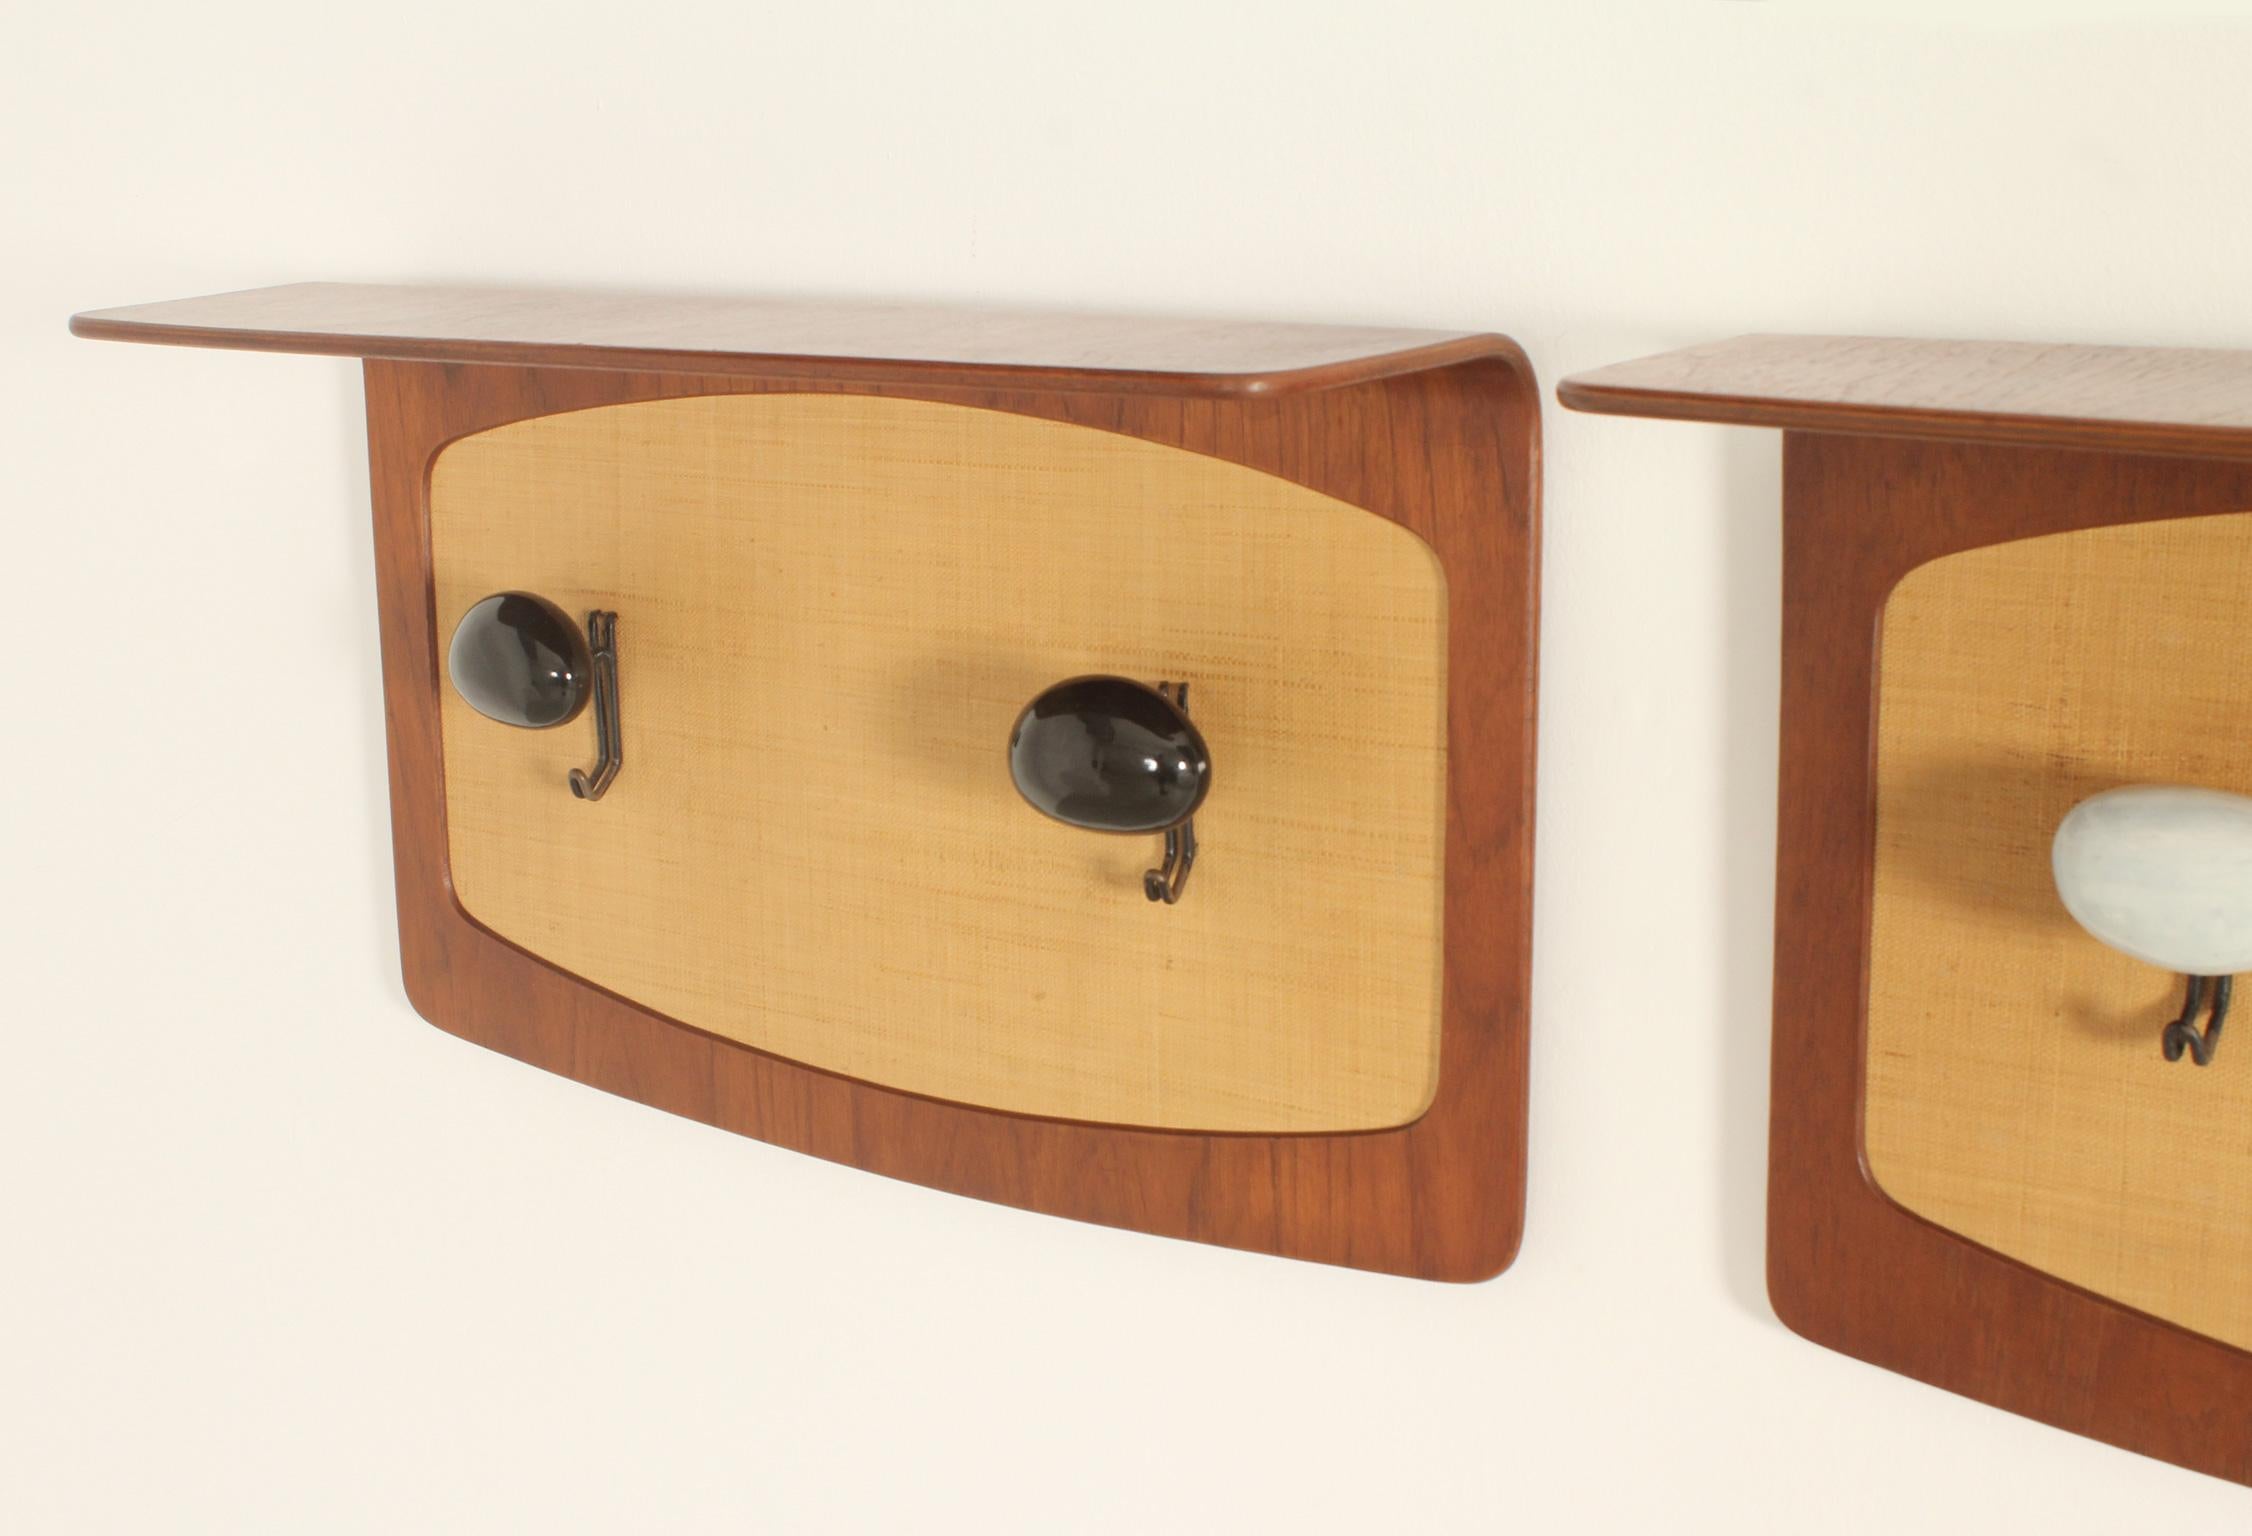 Pair of Coat Racks in Teak and Seagrass by Campo & Graffi for Home, 1950's  For Sale 3